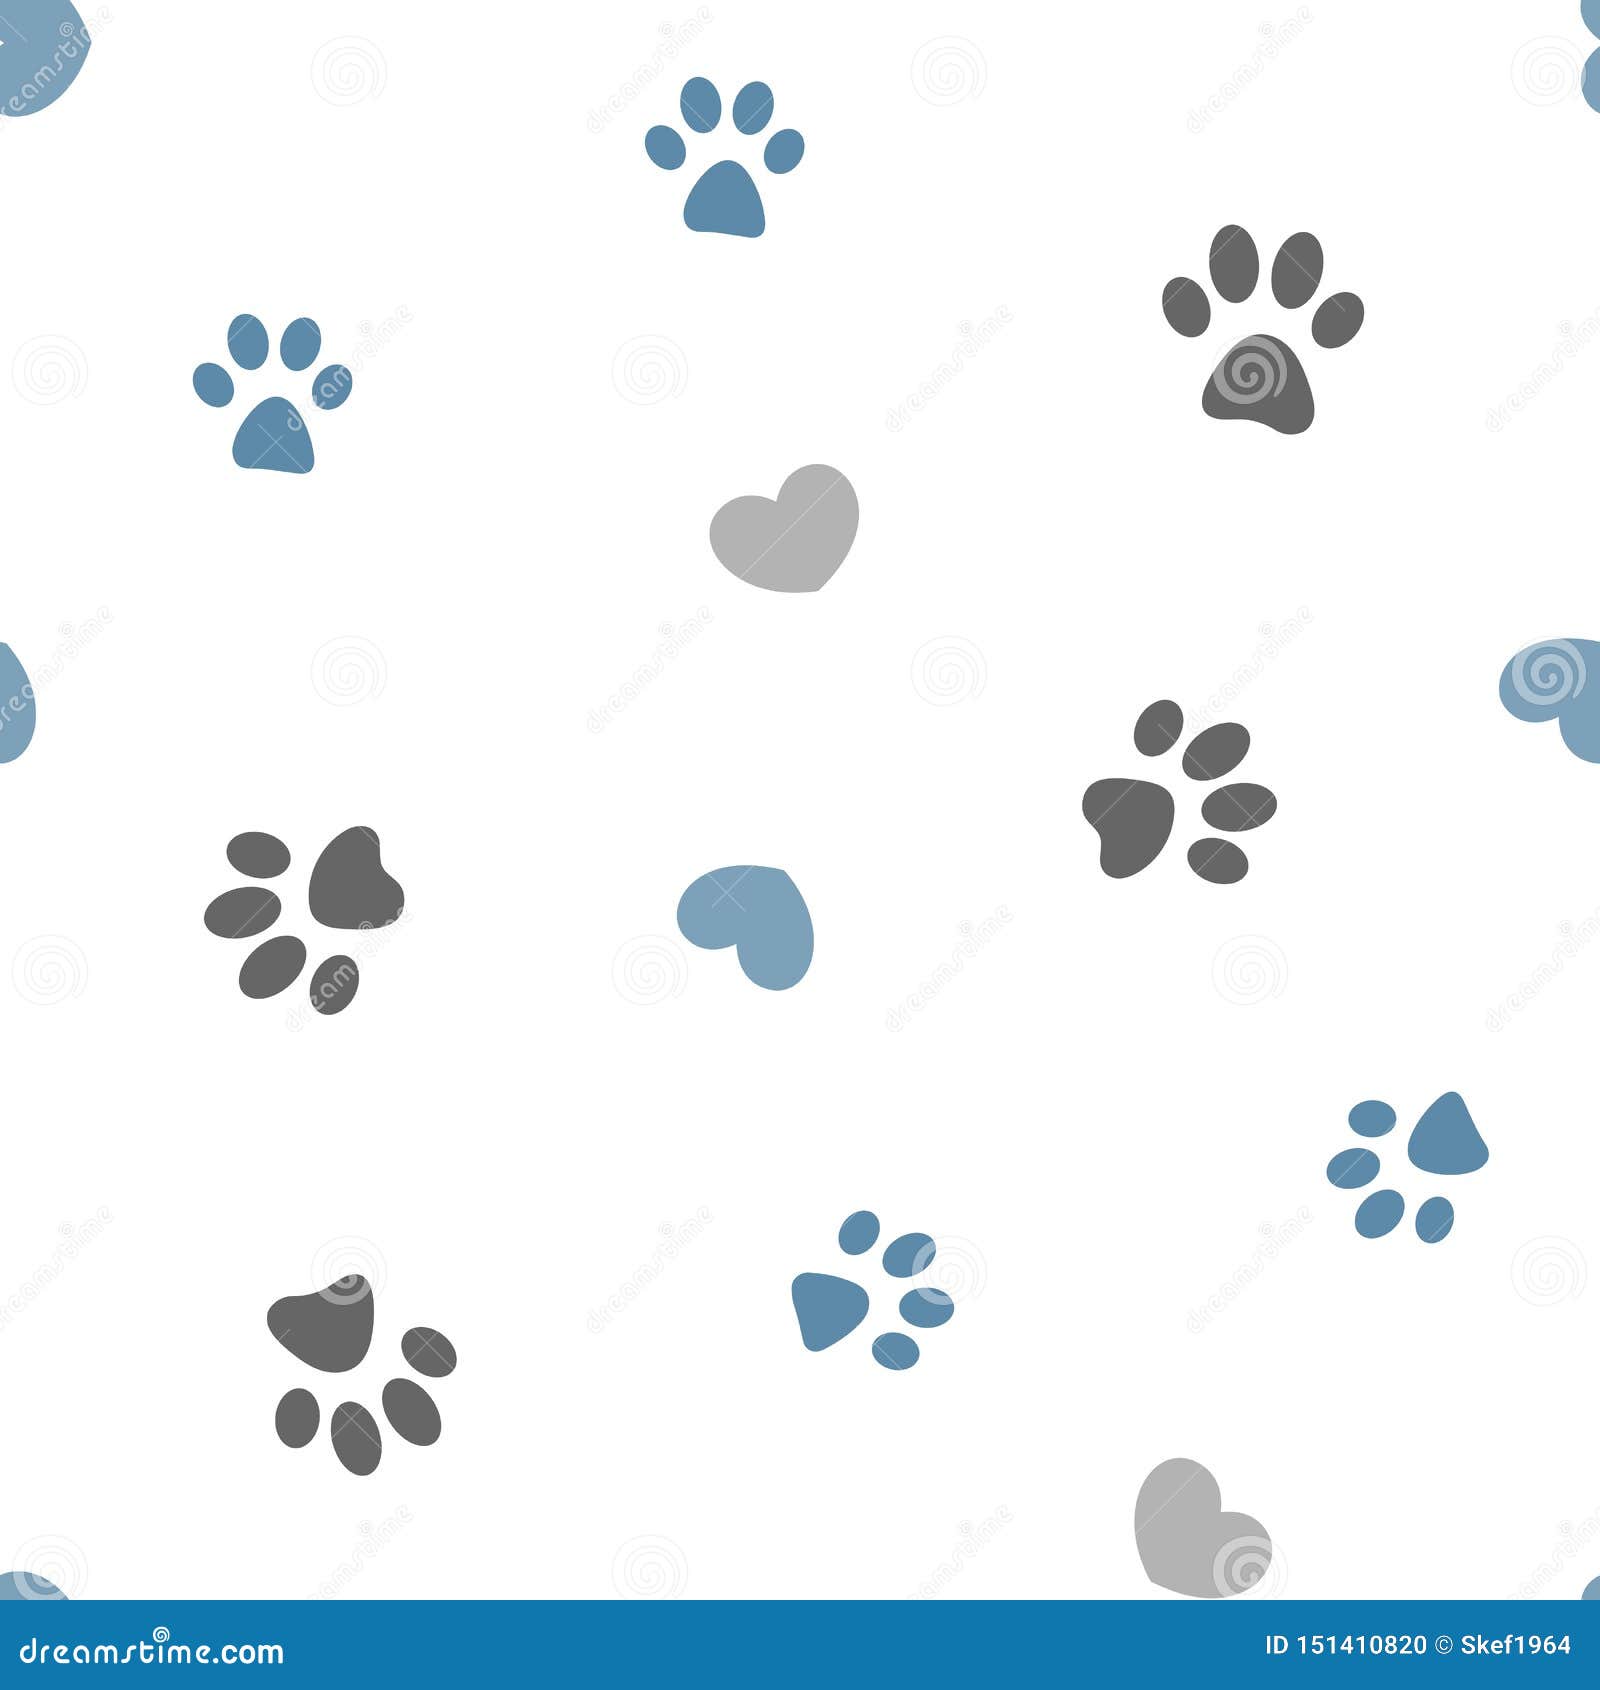 seamless pattern paws and hearts.